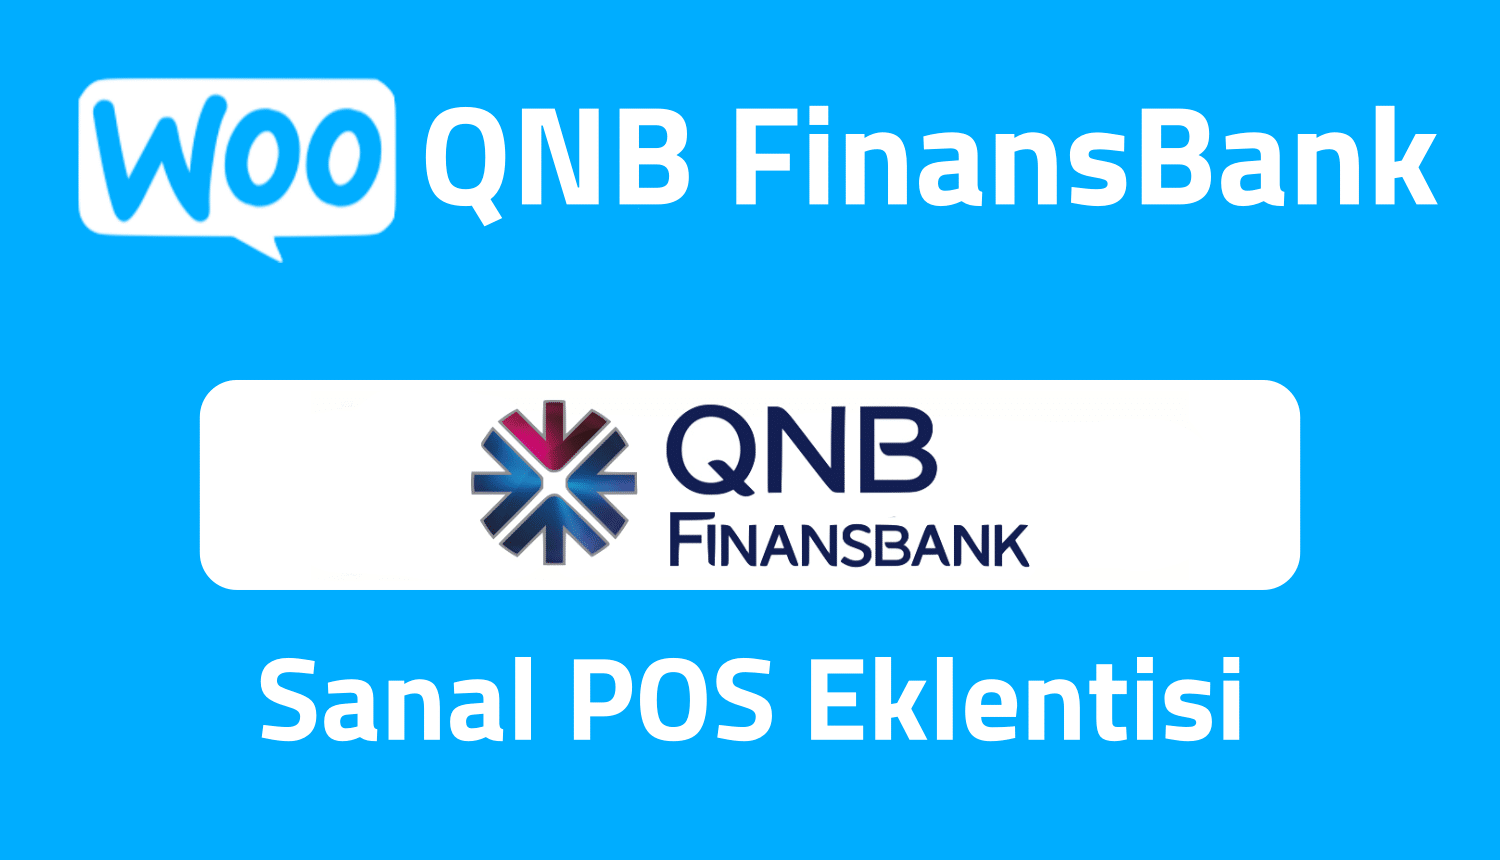 How to Get WooCommerce QNB Finansbank Virtual Pos? How to Integrate?